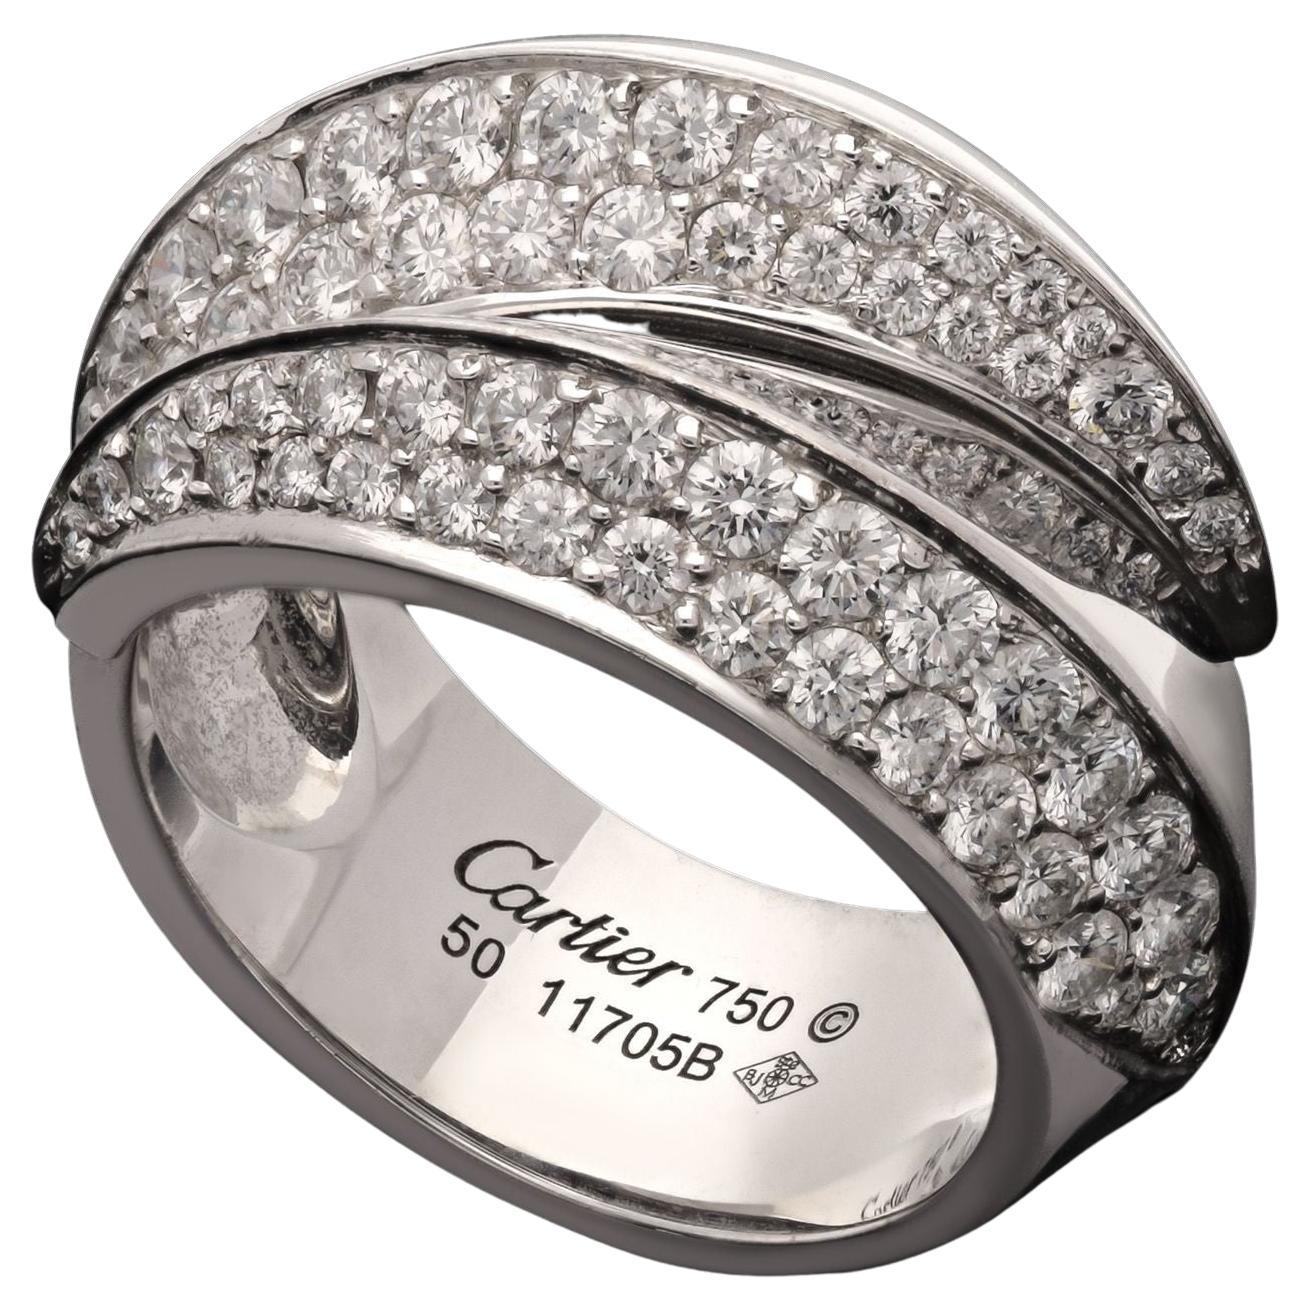 Cartier Panthère Griffe 18ct White Gold and Diamond Crossover Ring, circa 2000s